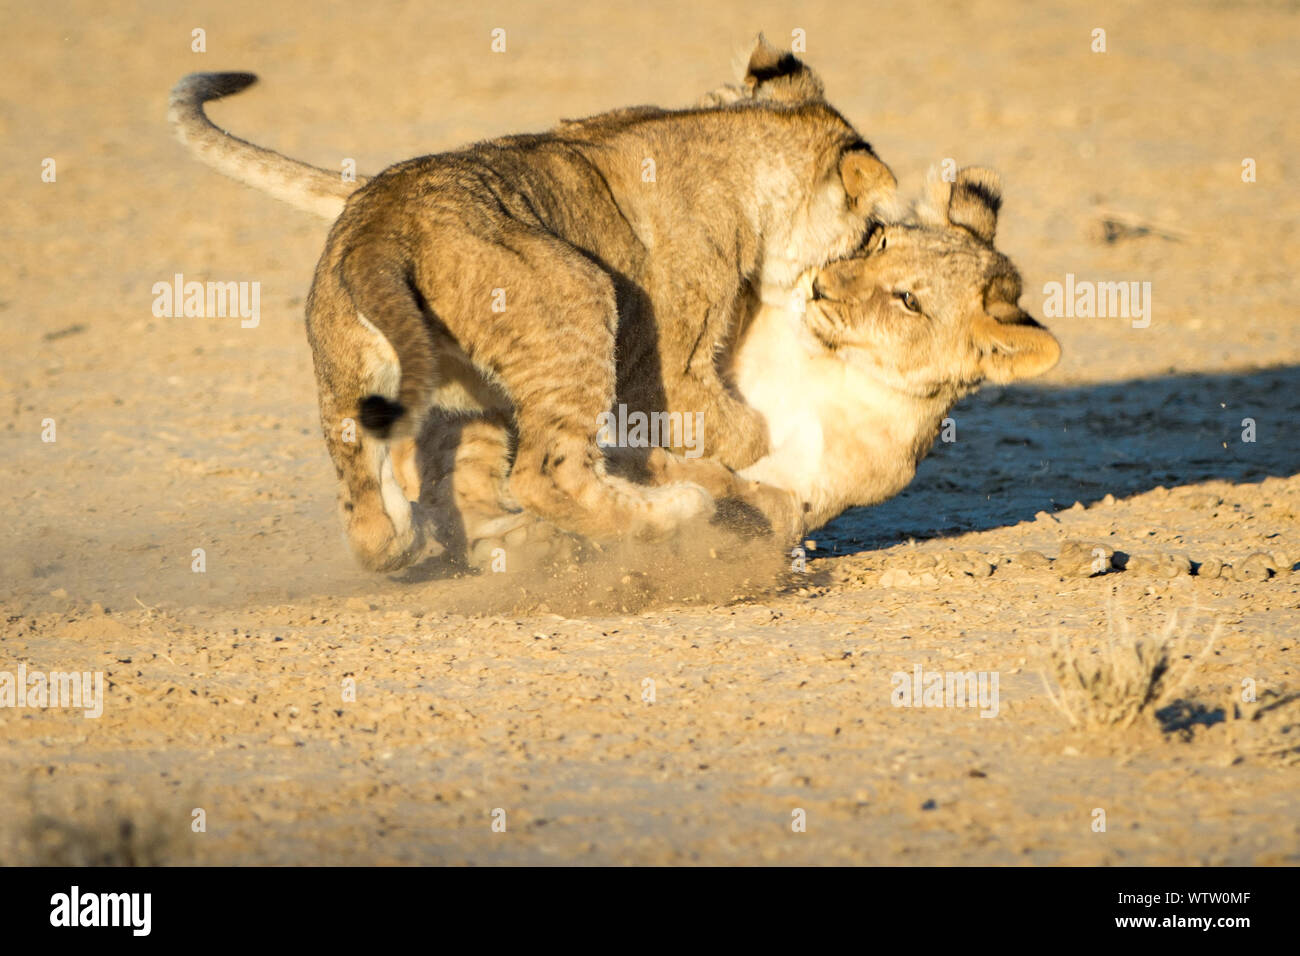 Lion Cubs Playing On Sand Stock Photo